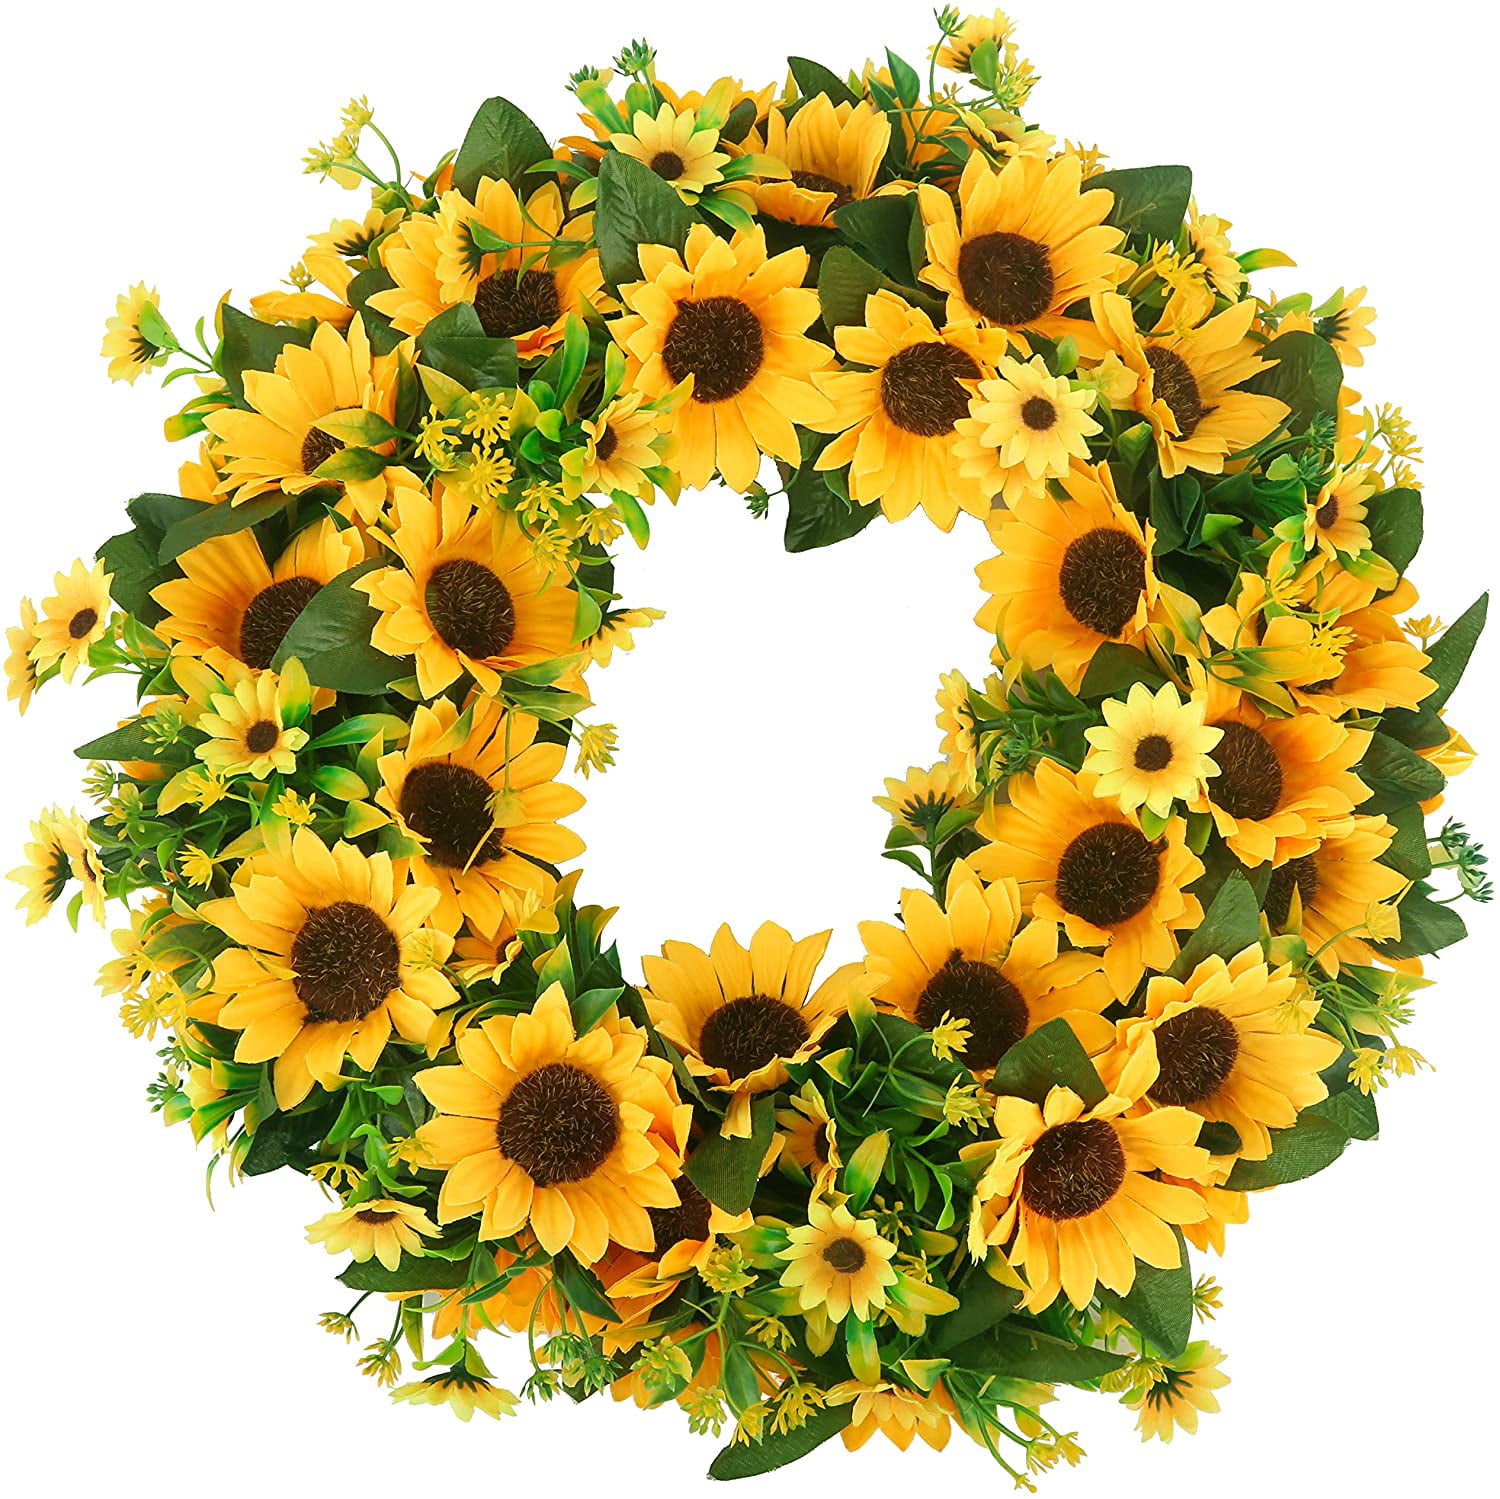 Mrinb Artificial Flower Wreath Garland with Yellow Sunflower and Green Leaves Front Door Window Wedding Decorations-45cm